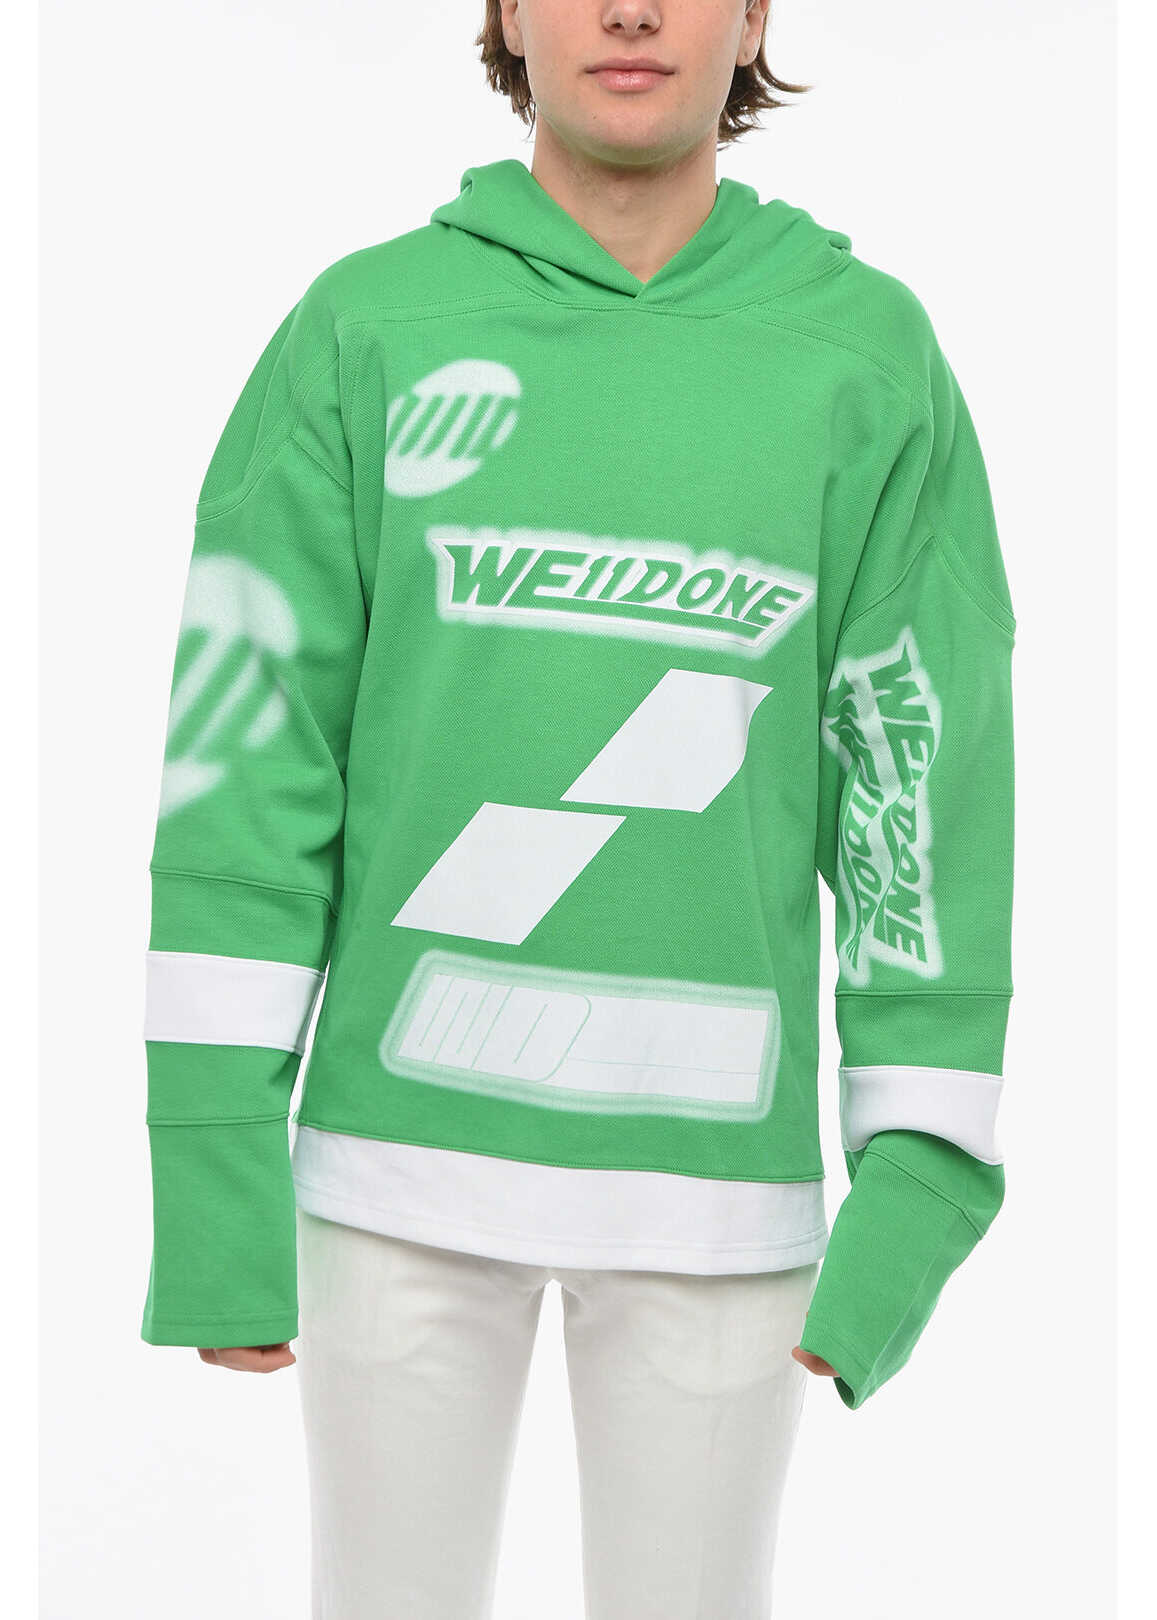 WE11DONE Spray Effect Football Oversized Hoodie Green